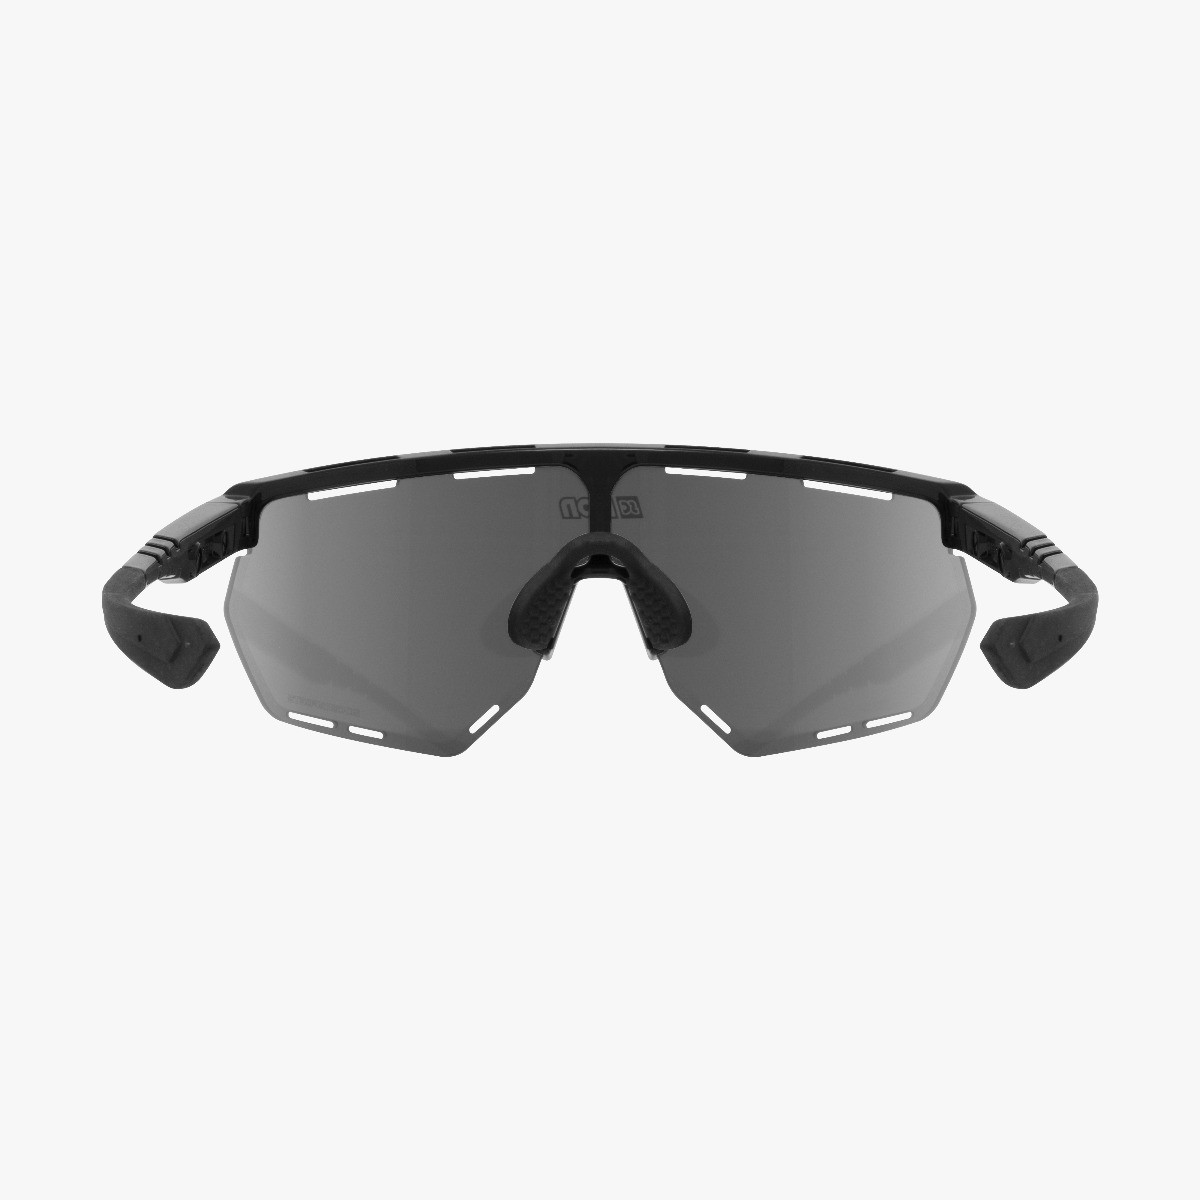 Scicon Sports | Aerowing Sport Performance Sunglasses - Black Gloss / Multimirror Red - EY26060201